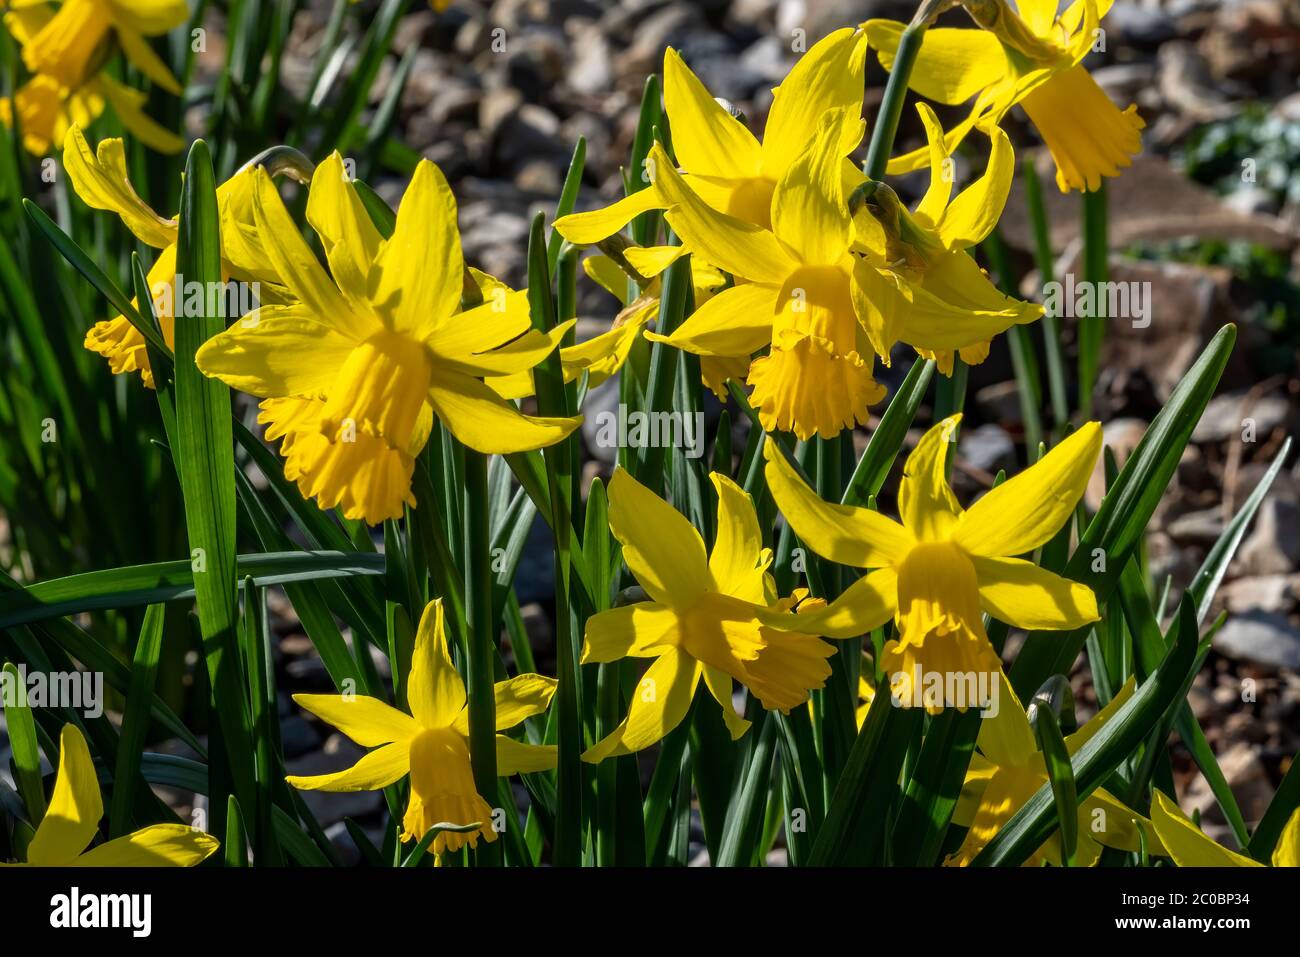 Daffodil (narcissus) 'February Gold' a yellow flower bulbous plant growing outdoors in the spring season Stock Photo